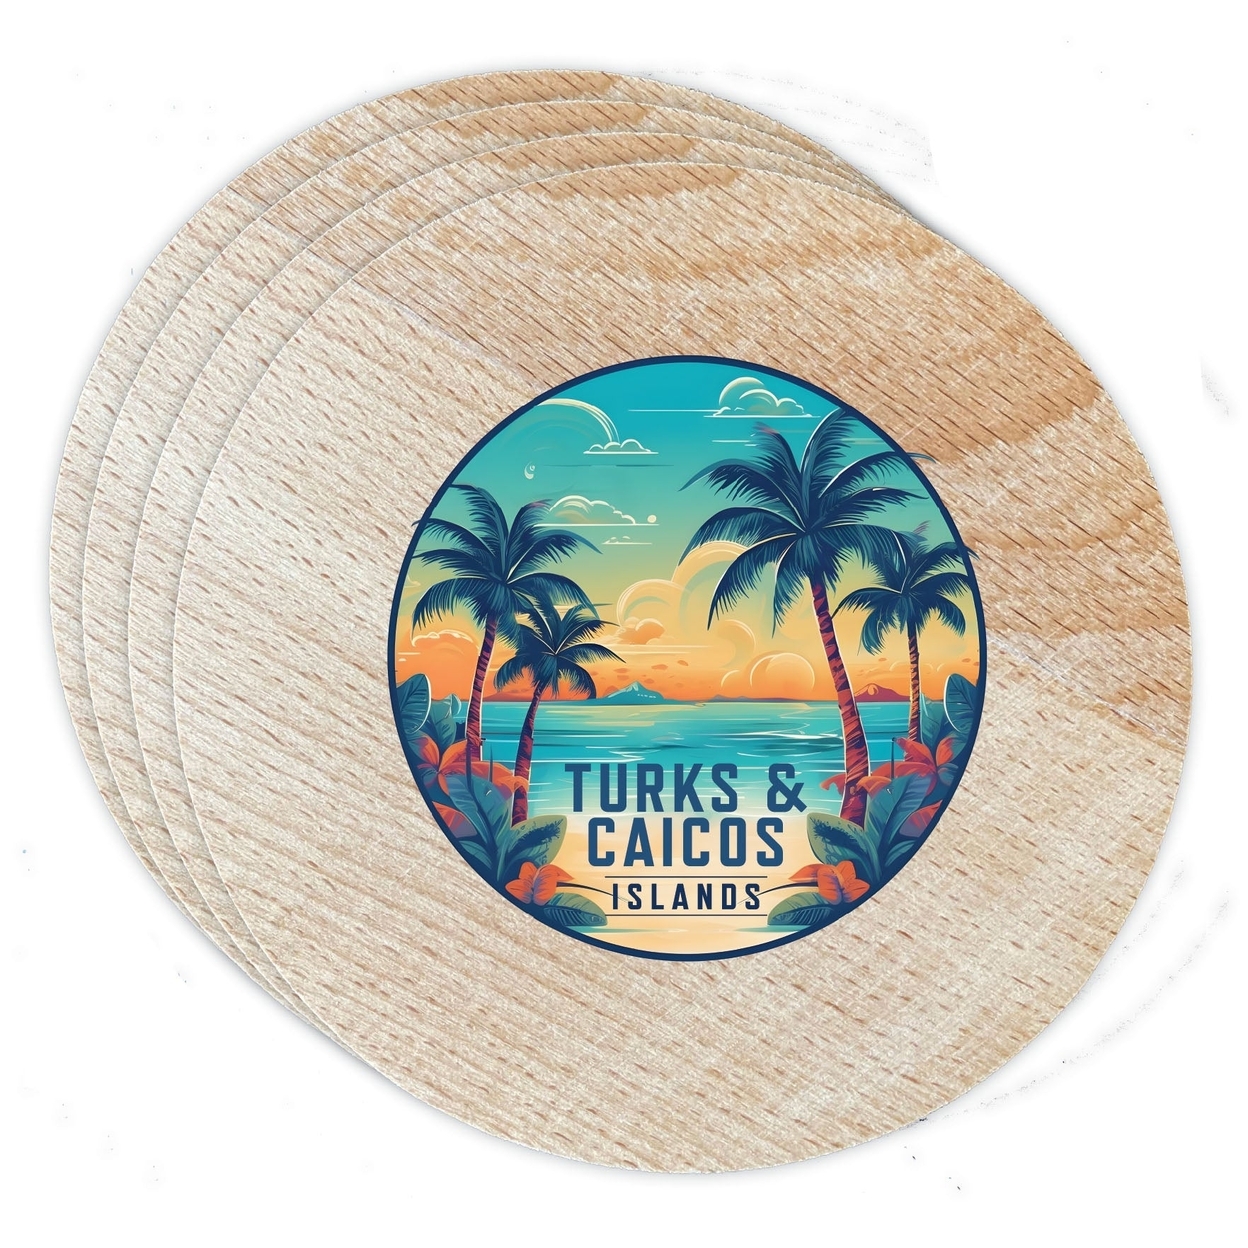 Turks And Caicos Design D Souvenir Coaster Wooden 3.5 X 3.5-Inch 4 Pack